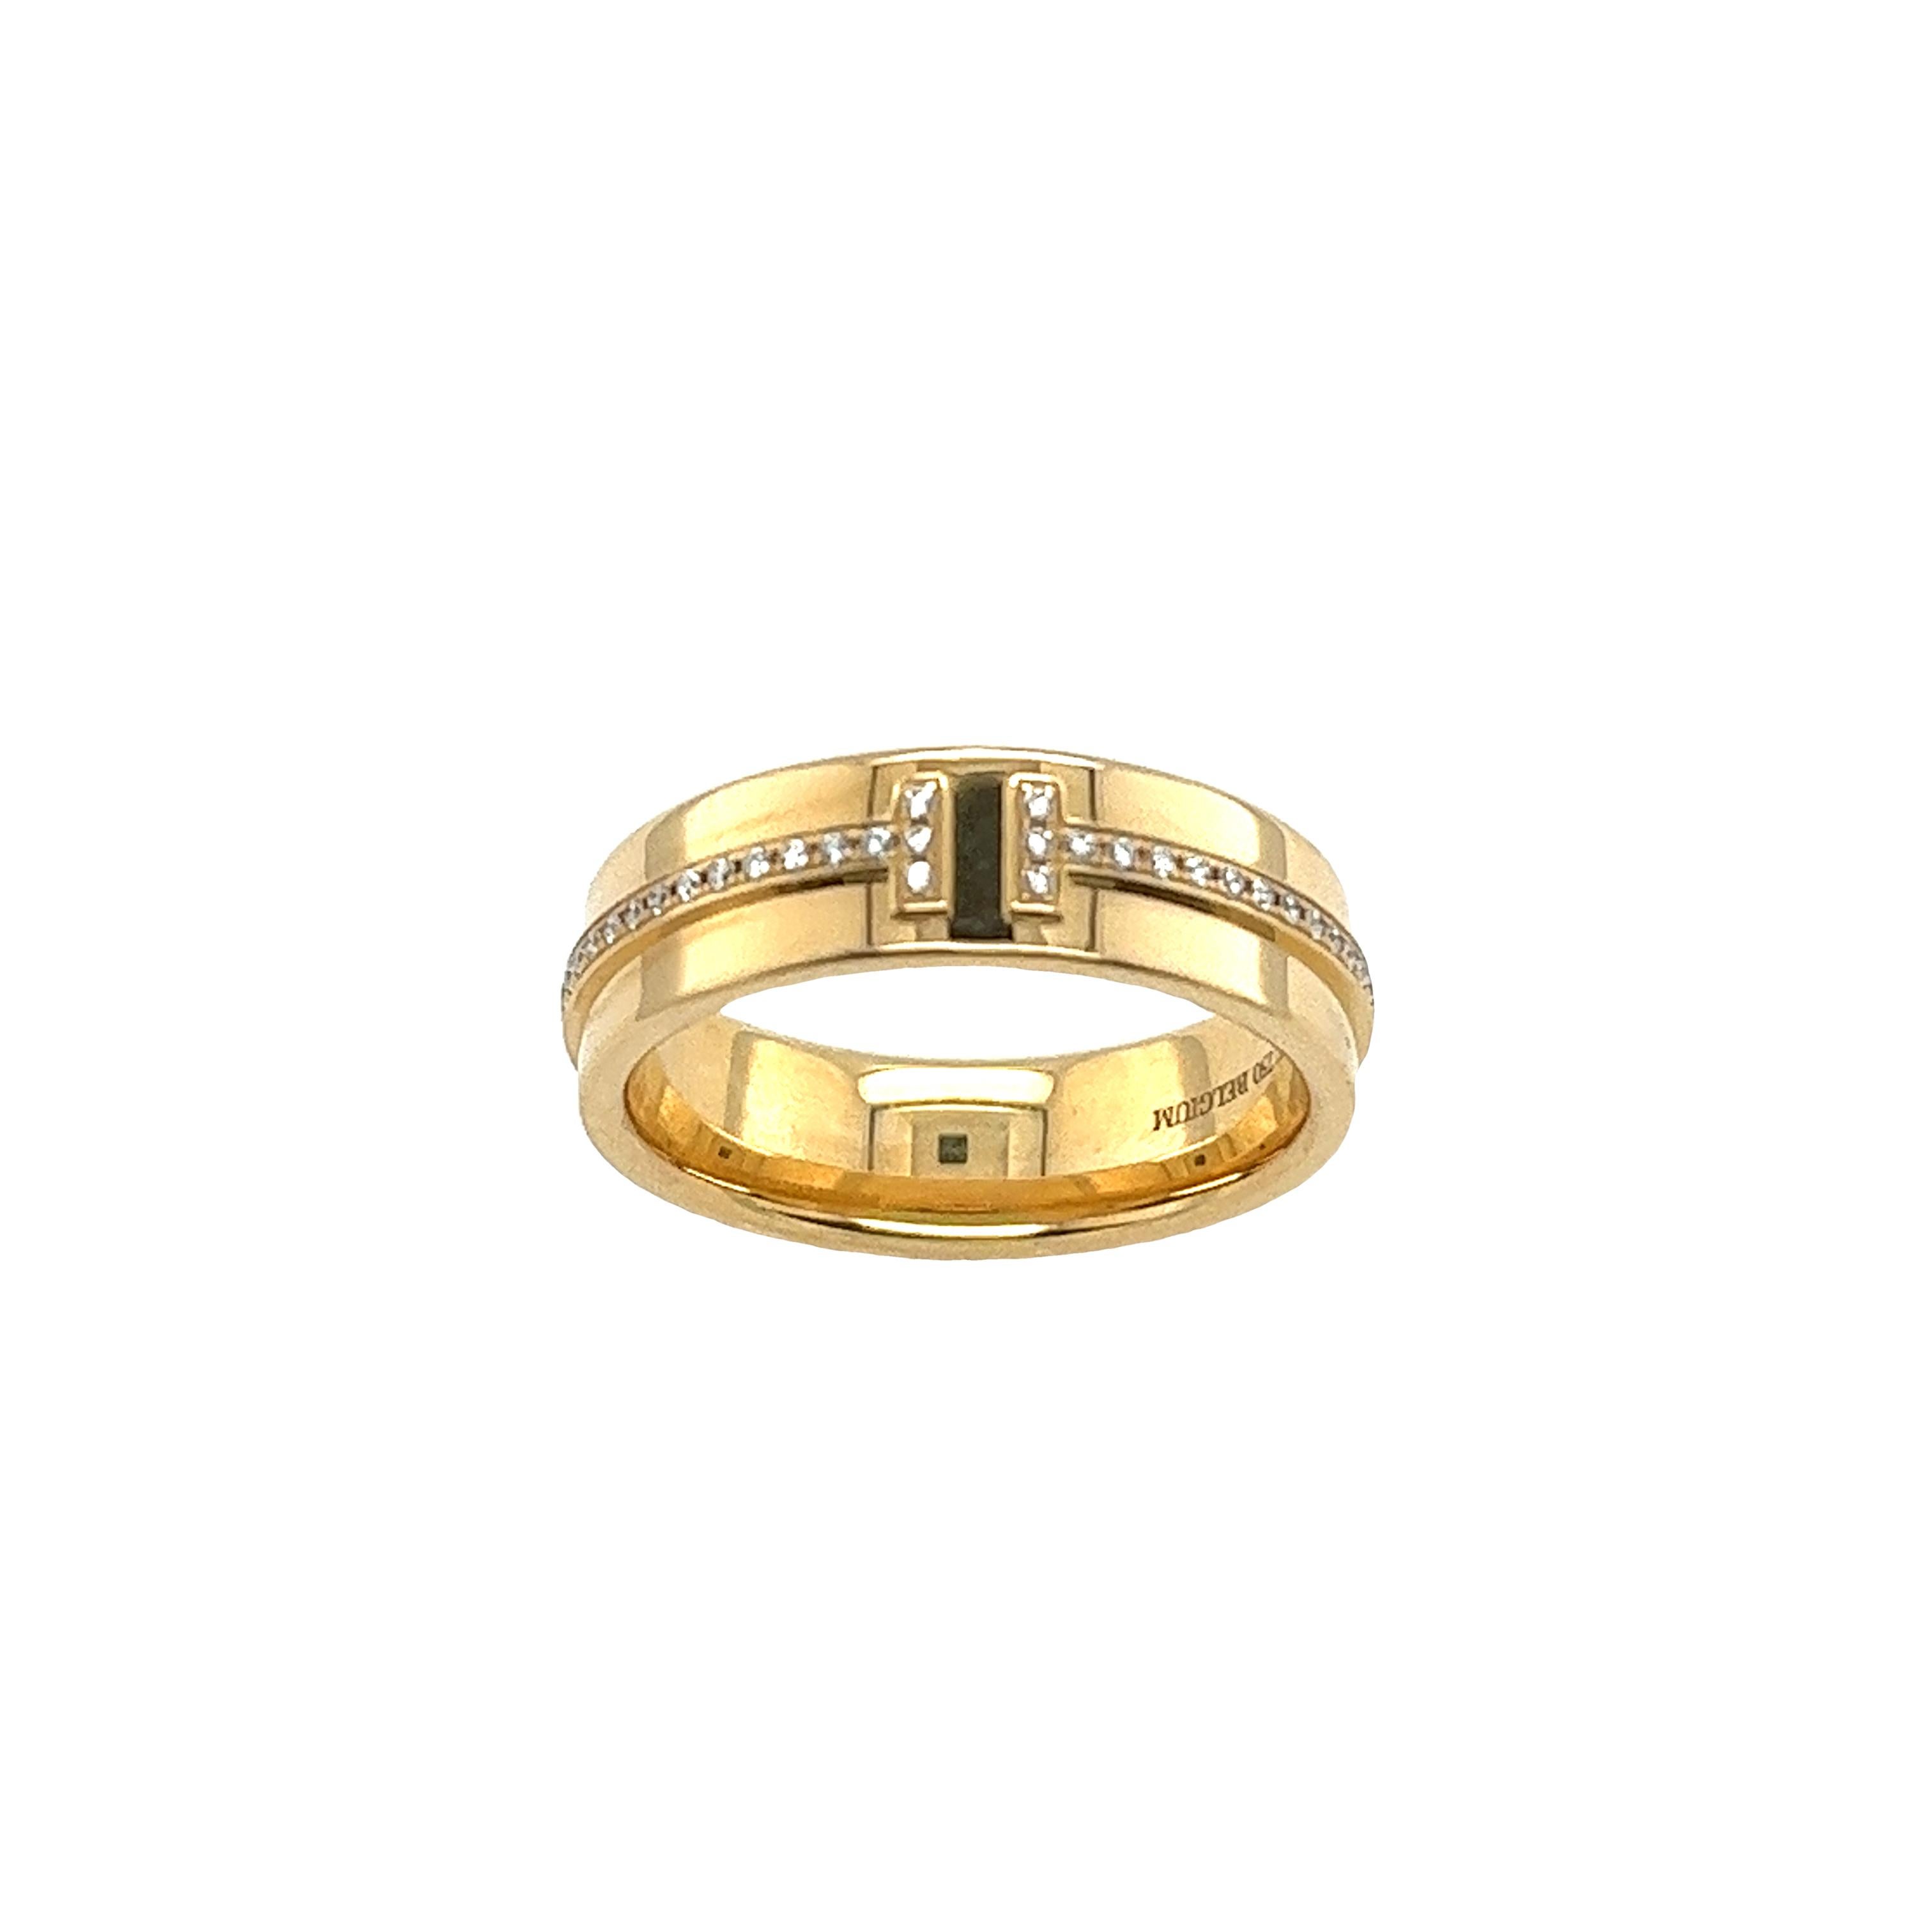 Experience refined luxury with the Tiffany & Co. Yellow Gold Diamond T Narrow Ring. Crafted with exquisite attention to detail, this elegant piece combines the warmth of yellow gold with the brilliance of diamonds. With its sleek design and subtle